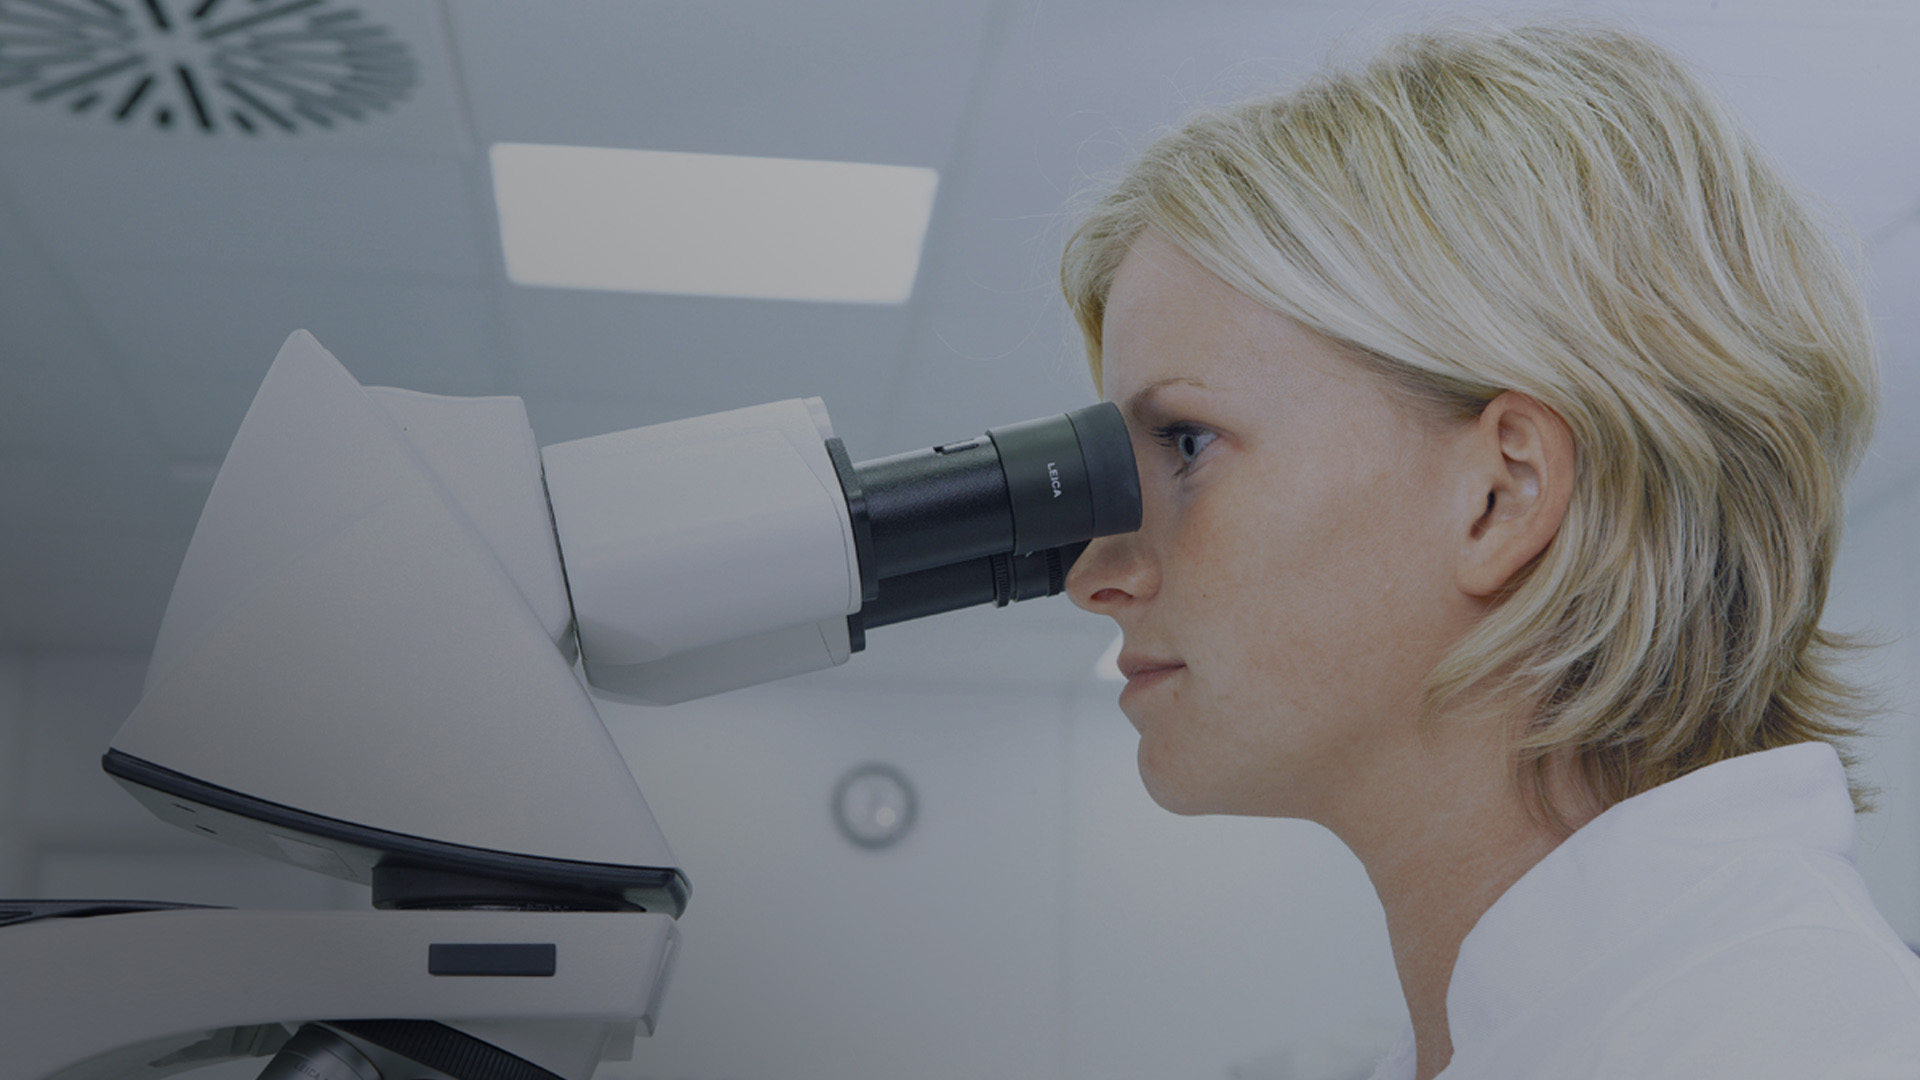 Operators can maintain a comfortable position while working using an ergonomic microscope setup.